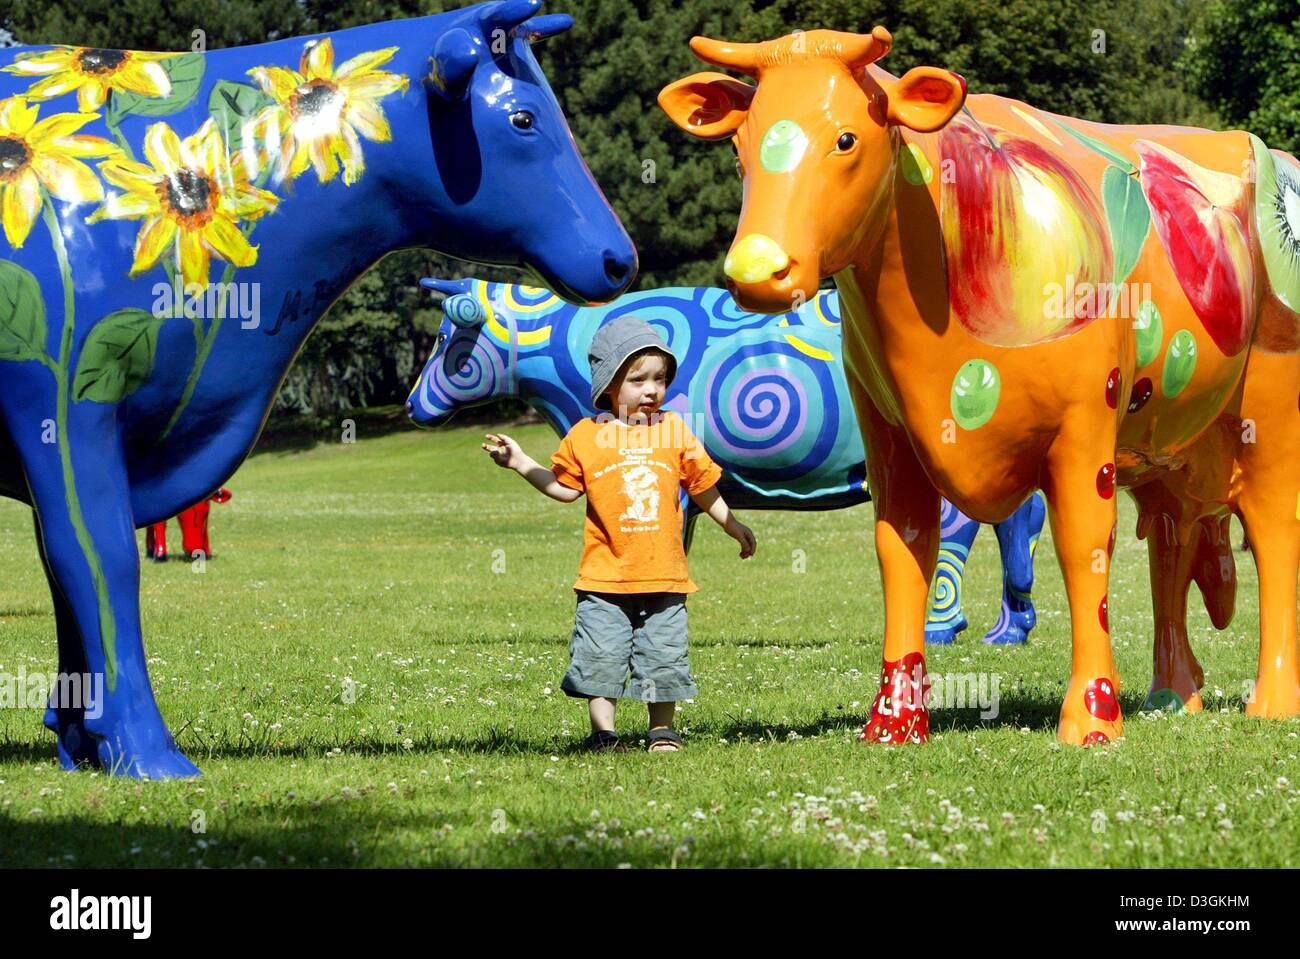 (dpa) - A small boy gazes at lifesized colourful cows made out of fibre glass at a park in Cologne, Germany, 17 July 2004. The 25 cows that were painted by four female artists are part of a travelling exhibition. The cows were manufactured at the workshop of Ulrike and Georg Kresken from Bocholt, Germany. Stock Photo